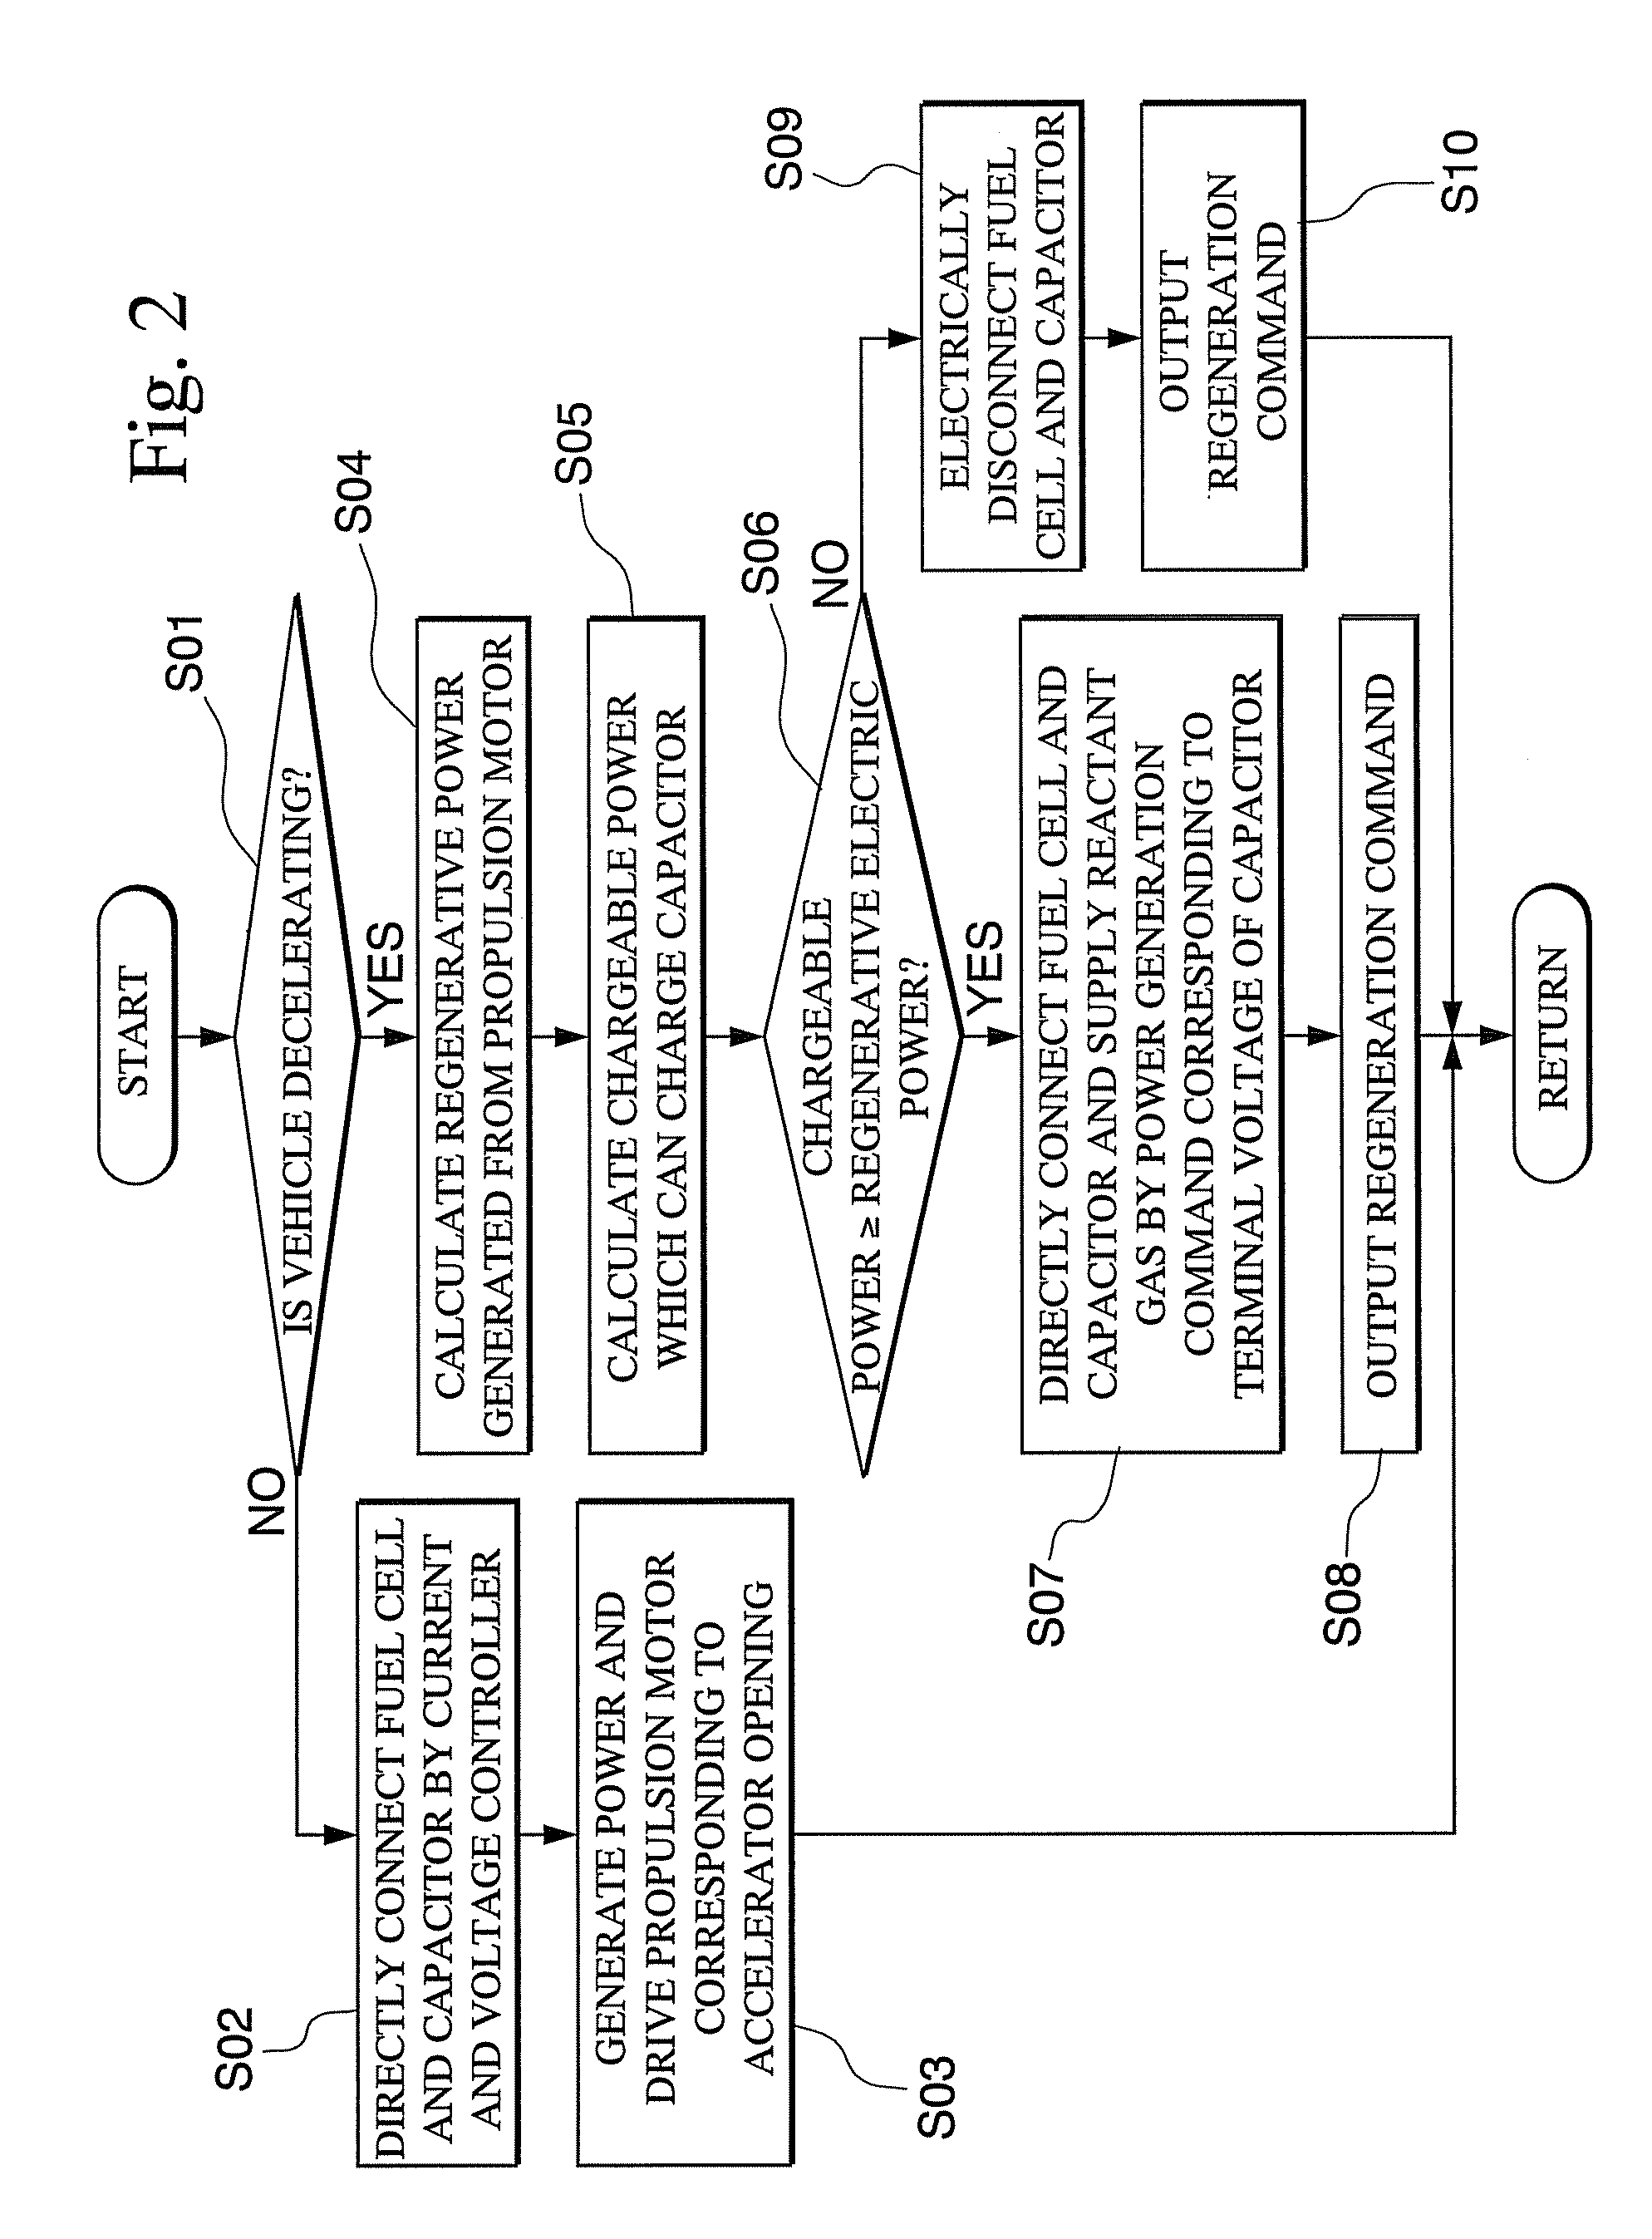 Fuel cell vehicle system